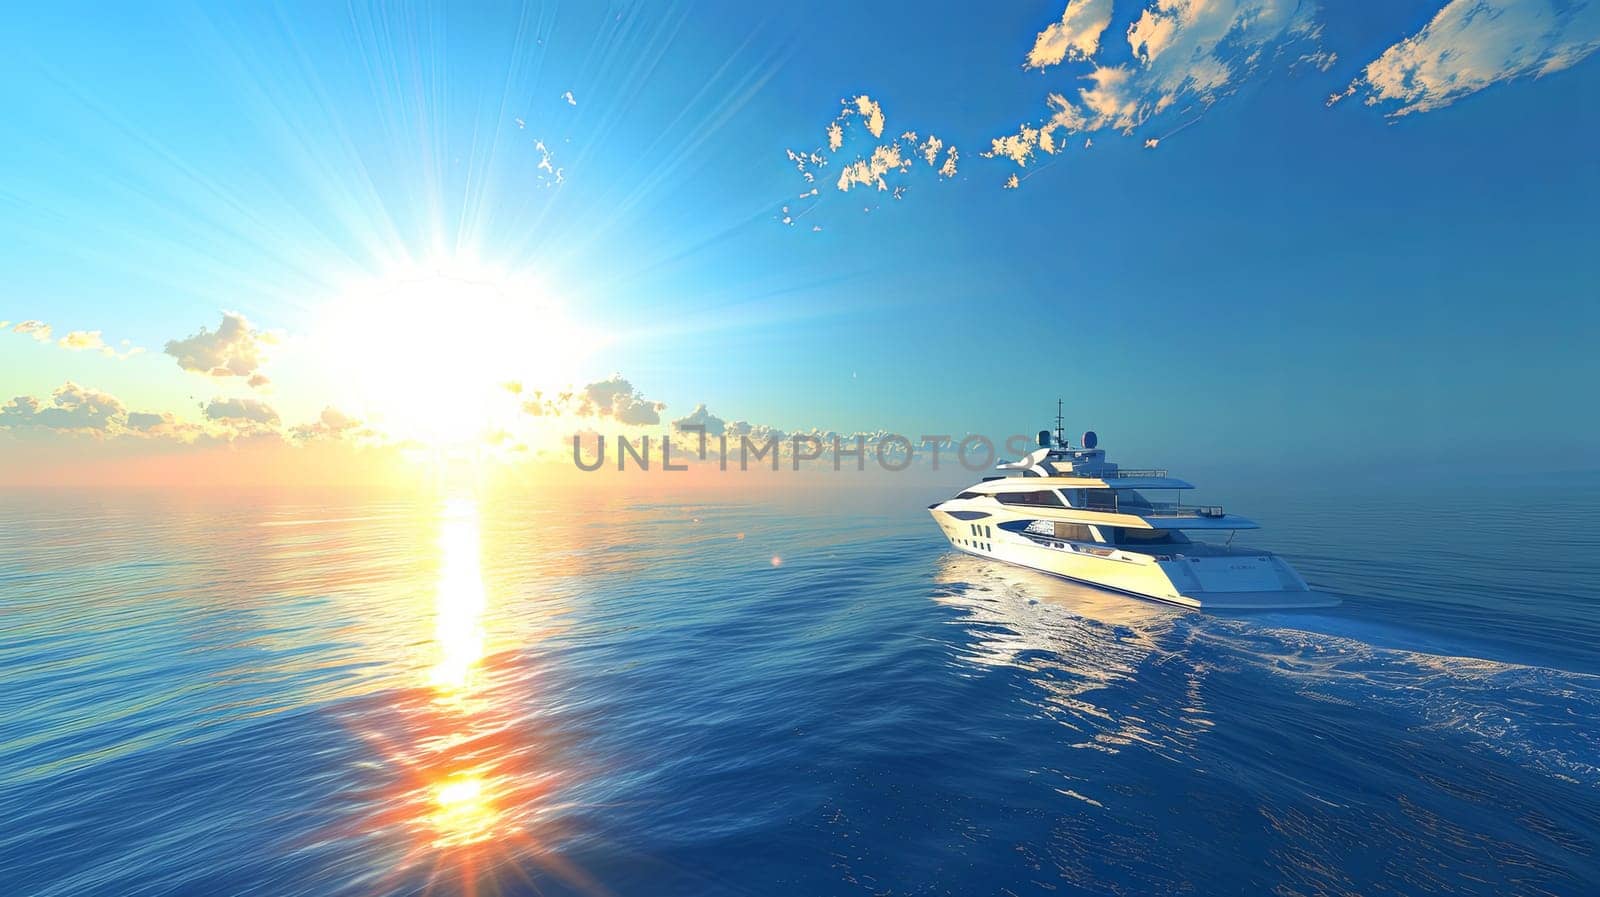 A luxurious white yacht peacefully floating atop calm waters, surrounded by serene views of a quiet lagoon with lush palm trees lining the shores.